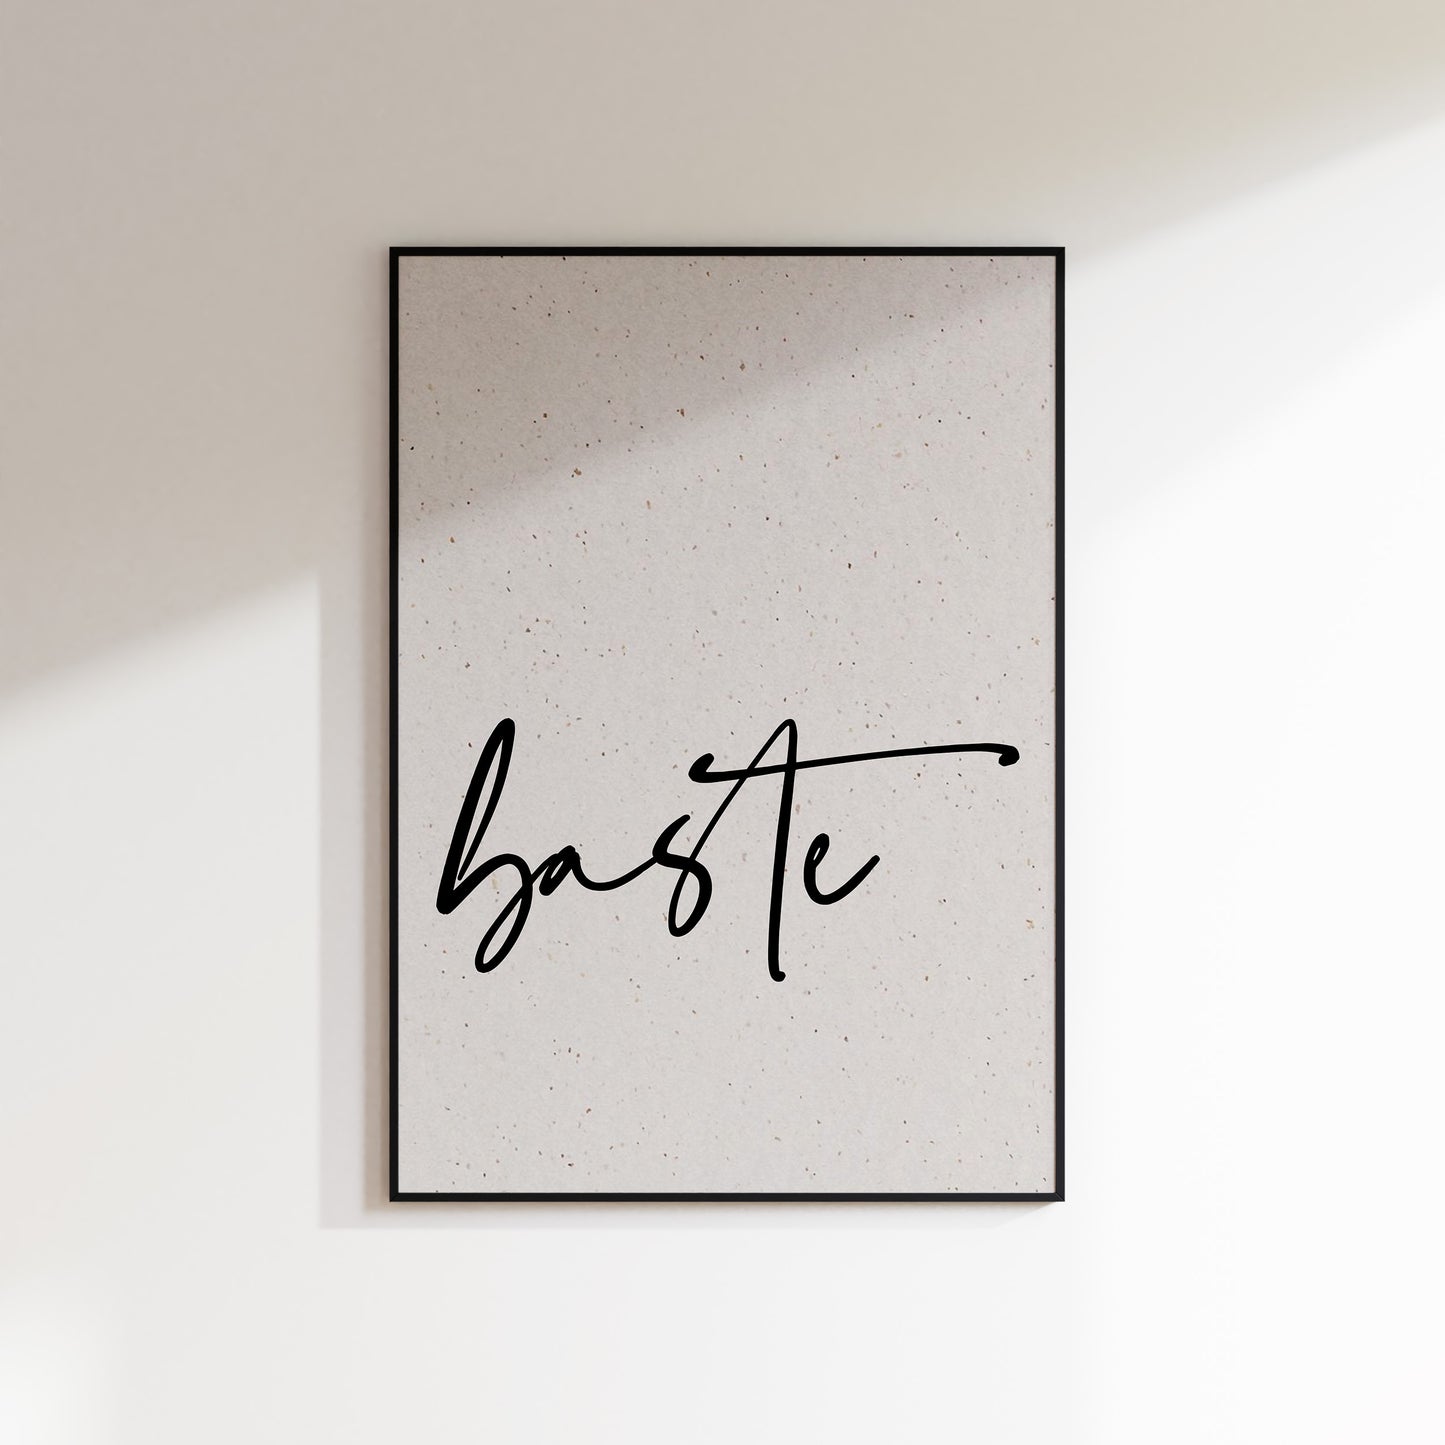 A print on textured paper with black text that reads 'baste' in a handwriting style typeface. A culinary print for the kitchen. Print is in a black frame on a white wall background.